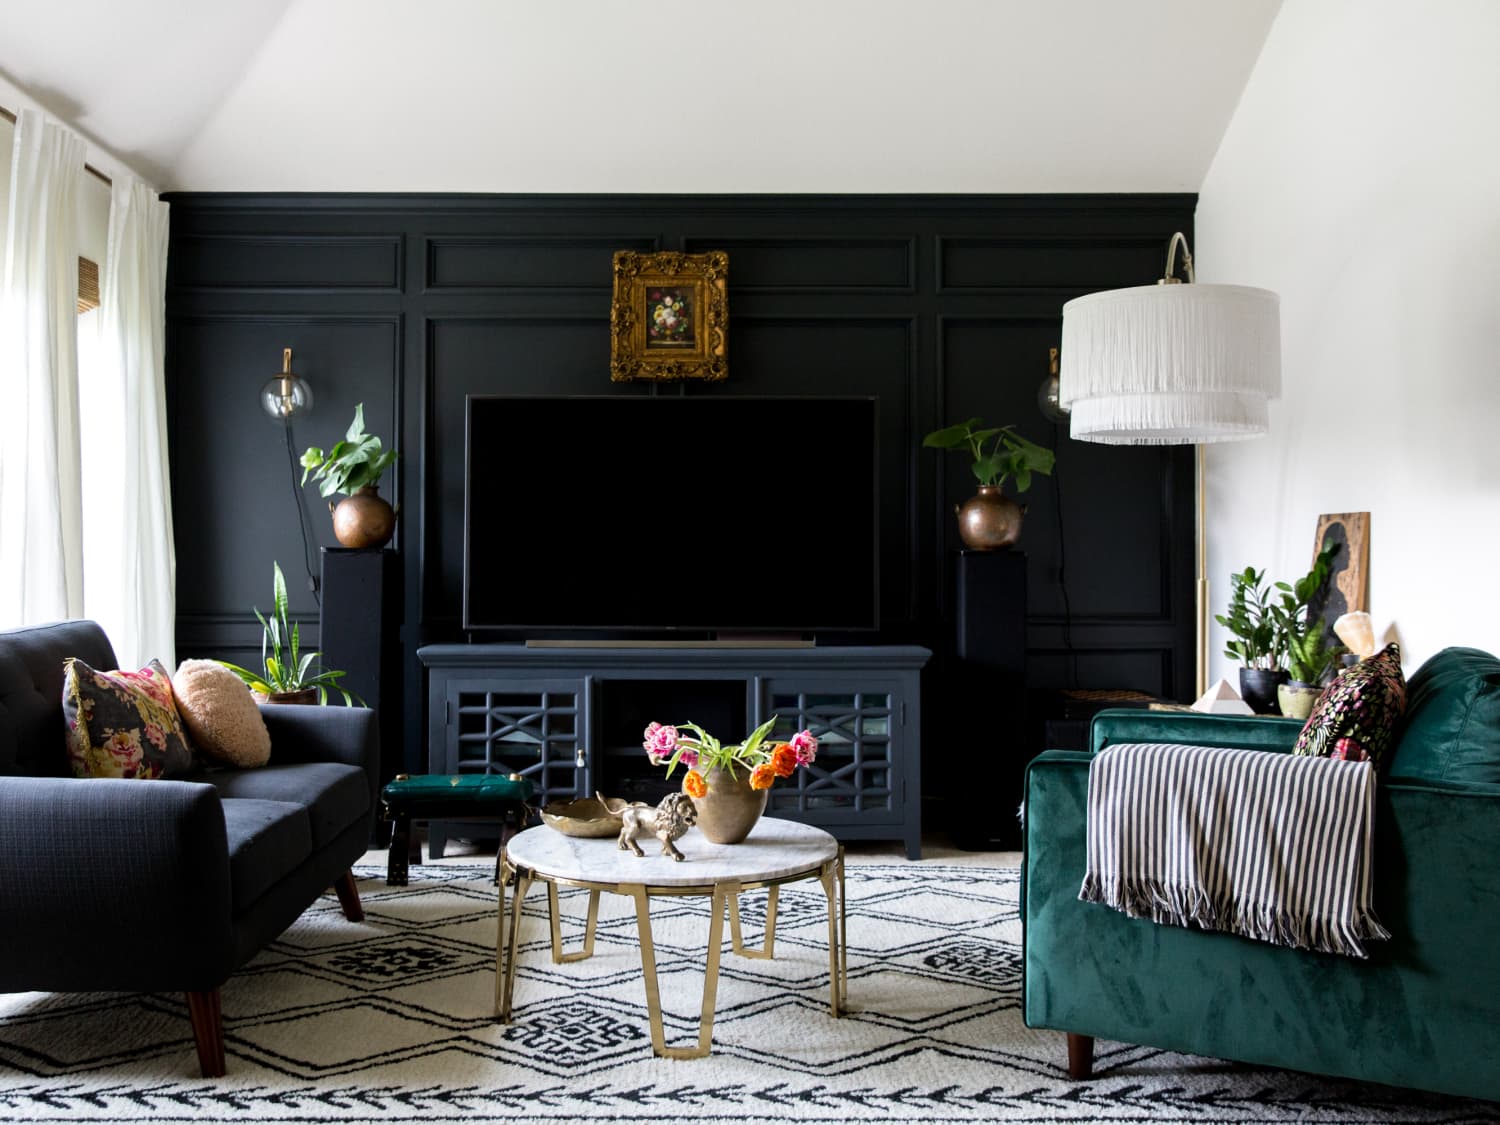 How to Decorate a Living Room in 13 Steps